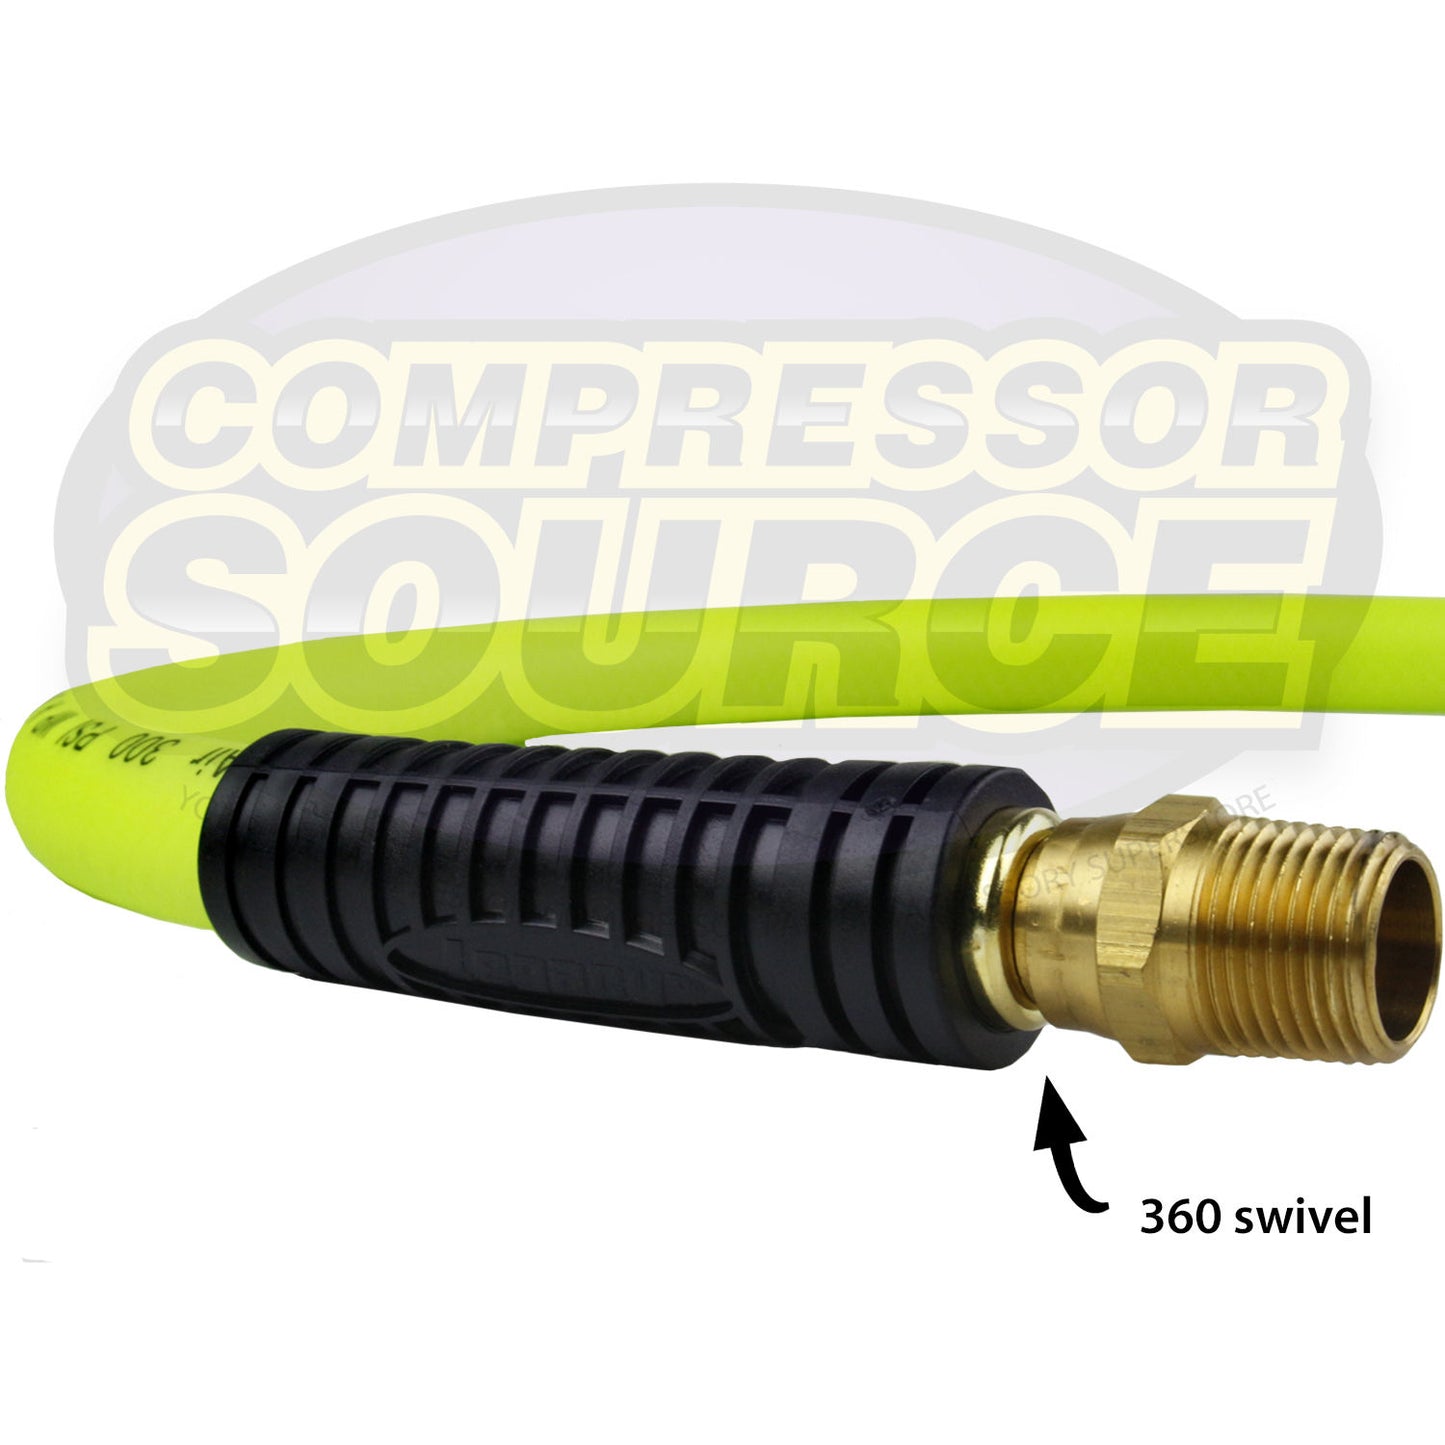 Flexzilla New 1/2" x 2' FT Air Hose Whip With 1/2' MNPT Swivel End HFZ1202YW4S